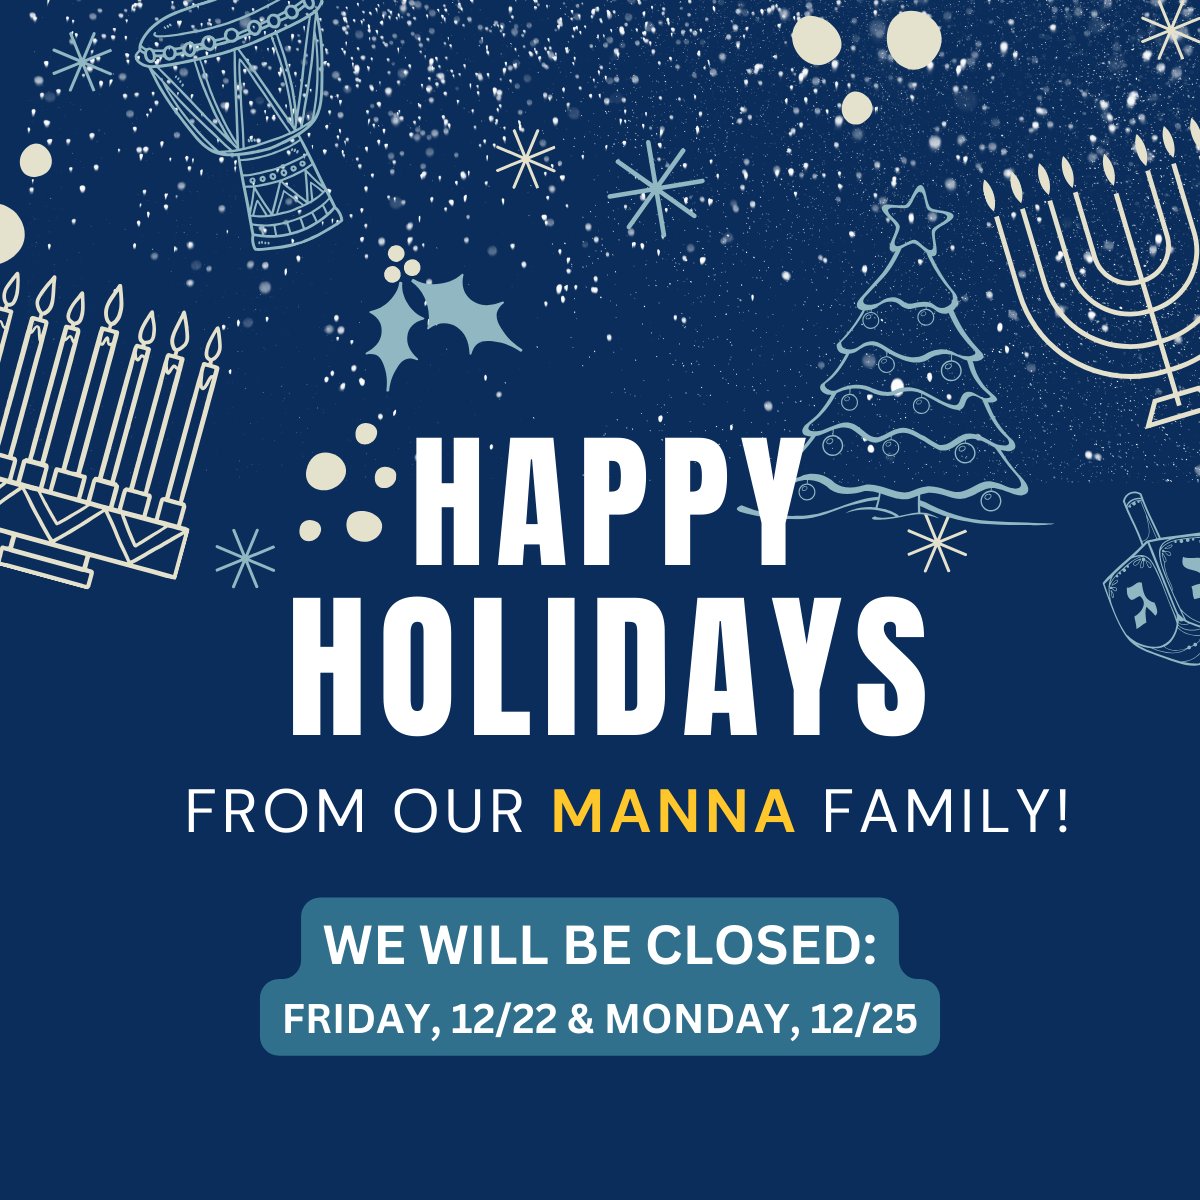 Wishing you and yours a wonderful holiday! We will be closed on Friday, 12/22 and Monday, 12/25. Normal business hours will resume on Tuesday, 12/26! 💙✨❄️